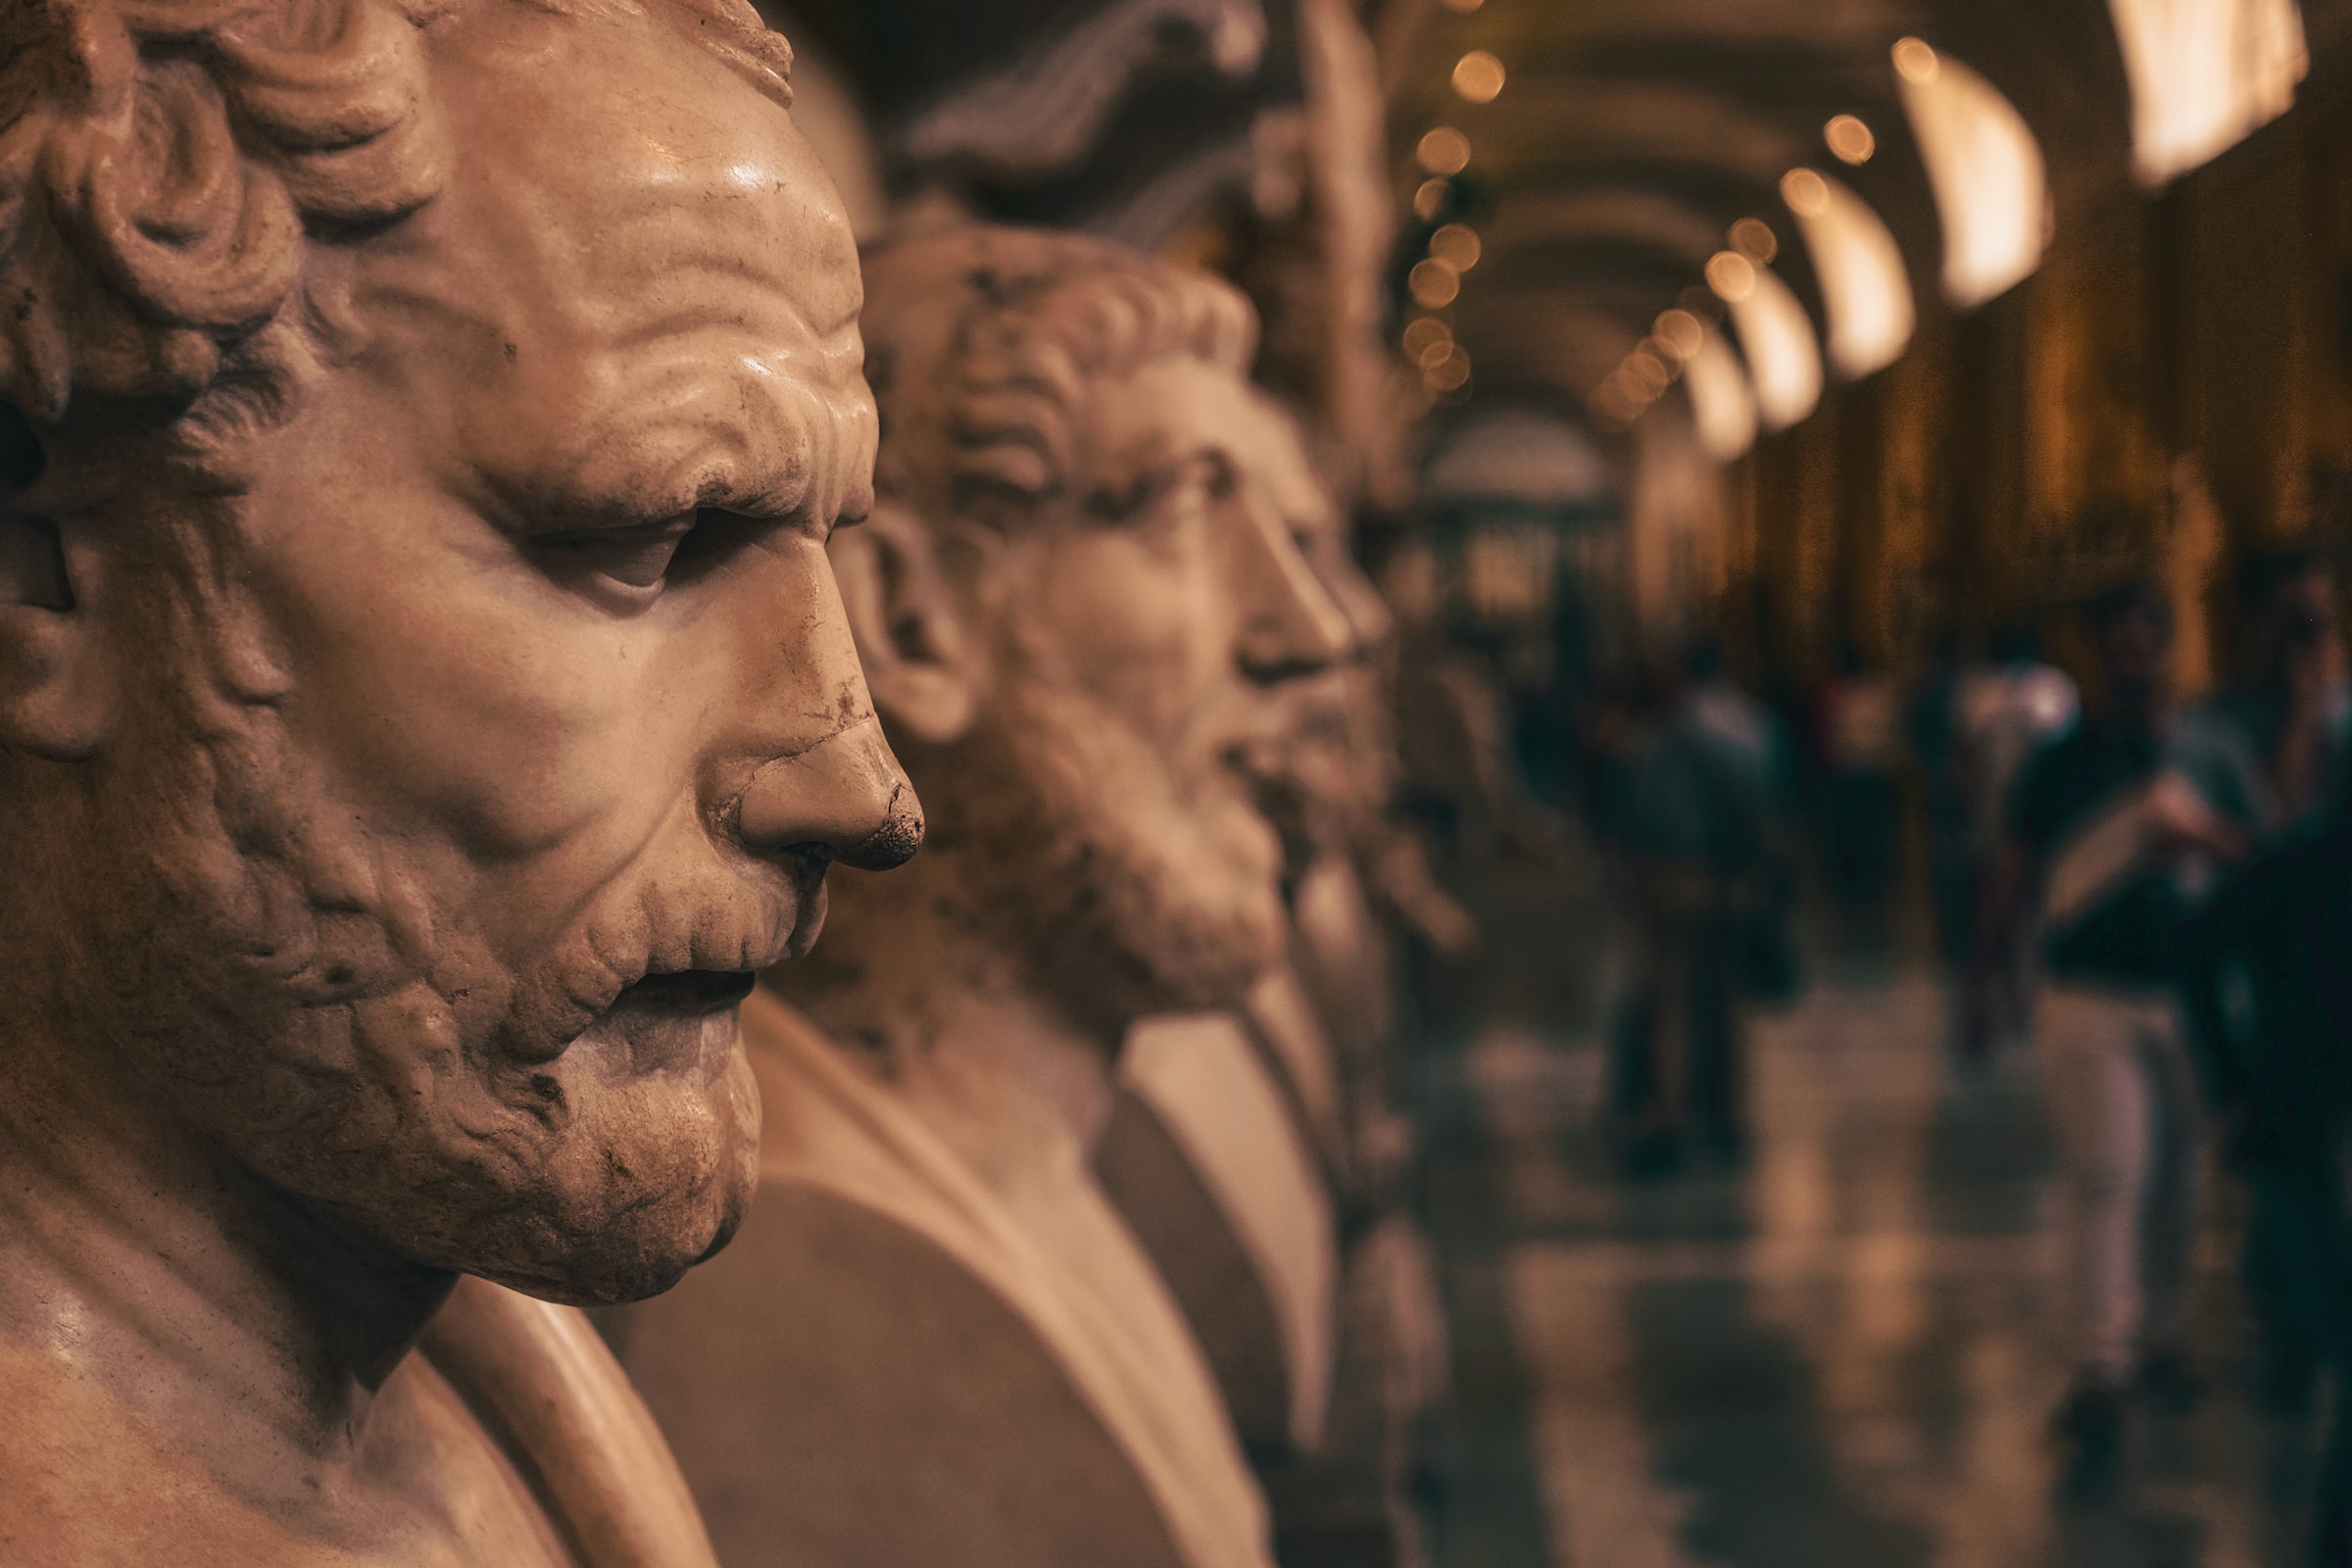 historical busts in a museum